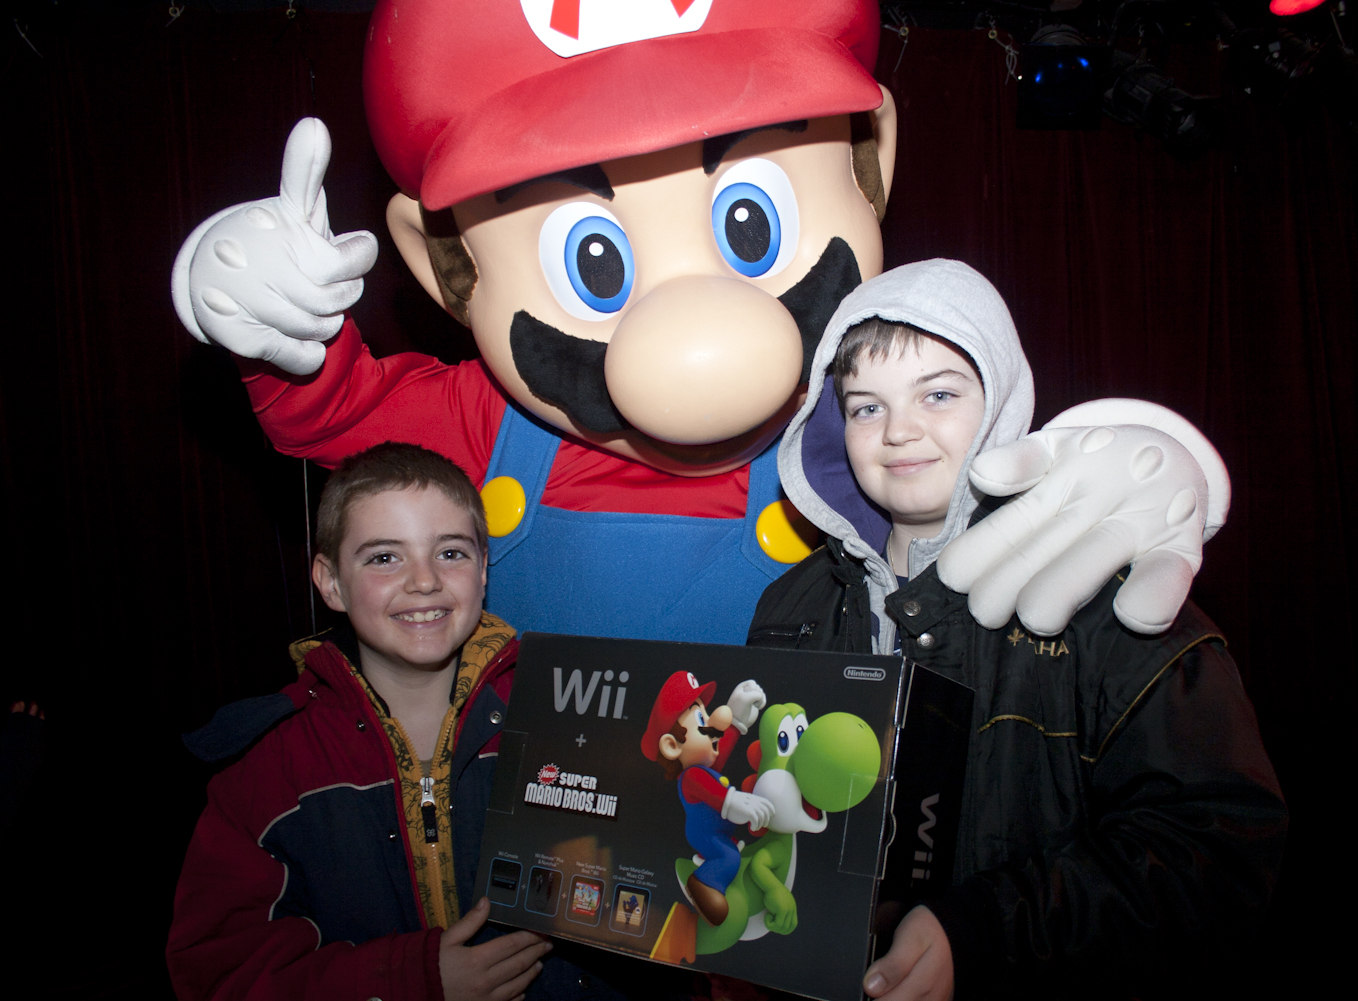 This happy fan was the first to win a Mario Party TM 9 bundle this past weekend at the Mario Party 9 Launch Party. Loyal fans, young and old, partied with the legendary Nintendo character at the Hard Rock Cafe. 